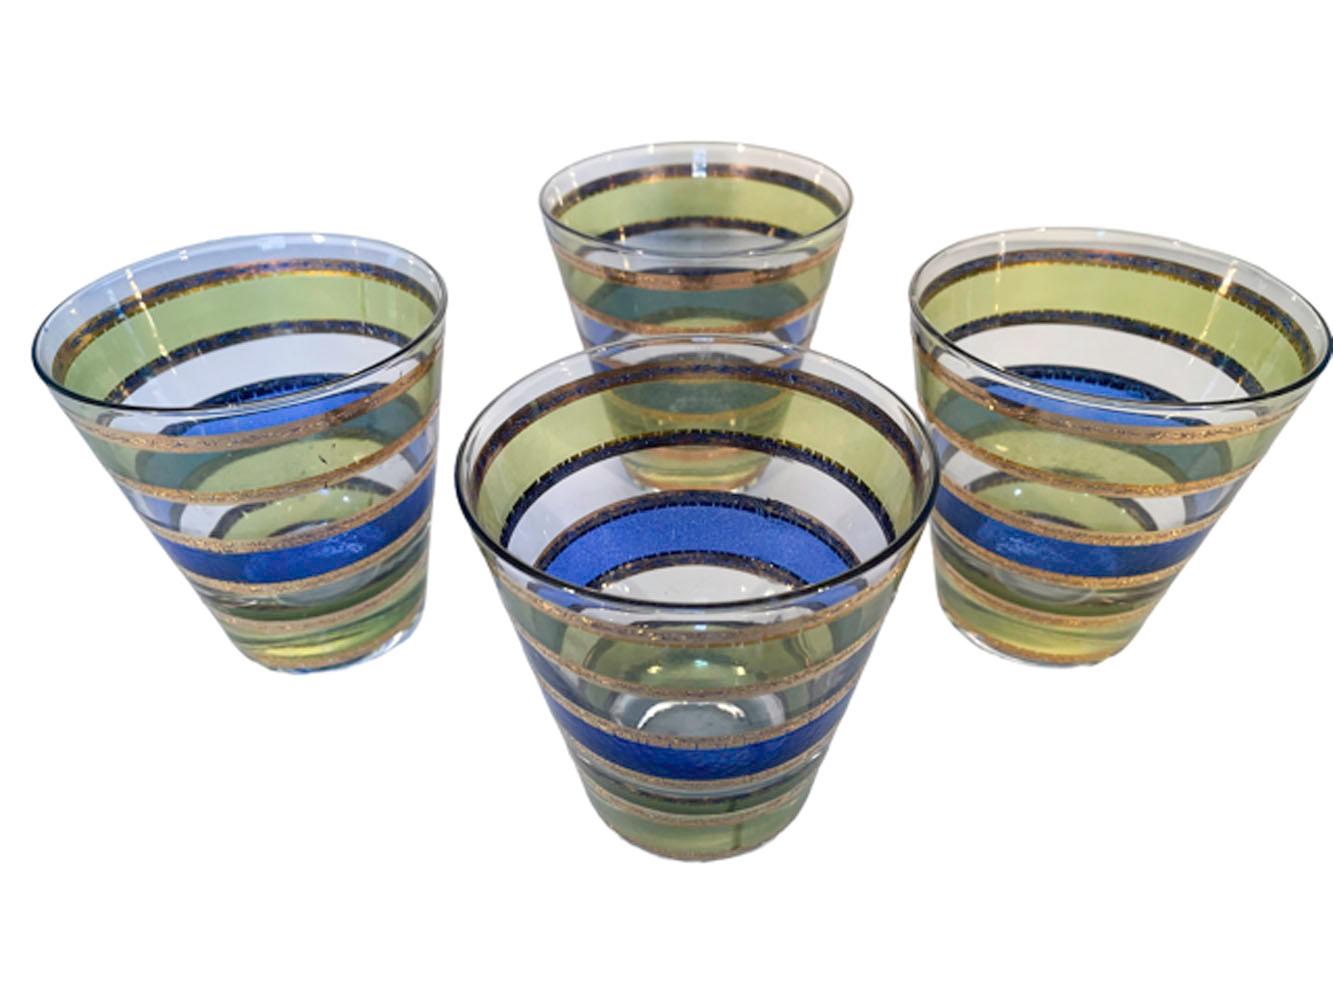 Four vintage double old fashioned glasses by Culver, LTD. in the Rondo pattern. Decorated with a band of translucent blue enamel between bands of translucent green enamel and with the bands having borders of 22k gold with irregular edges and raised